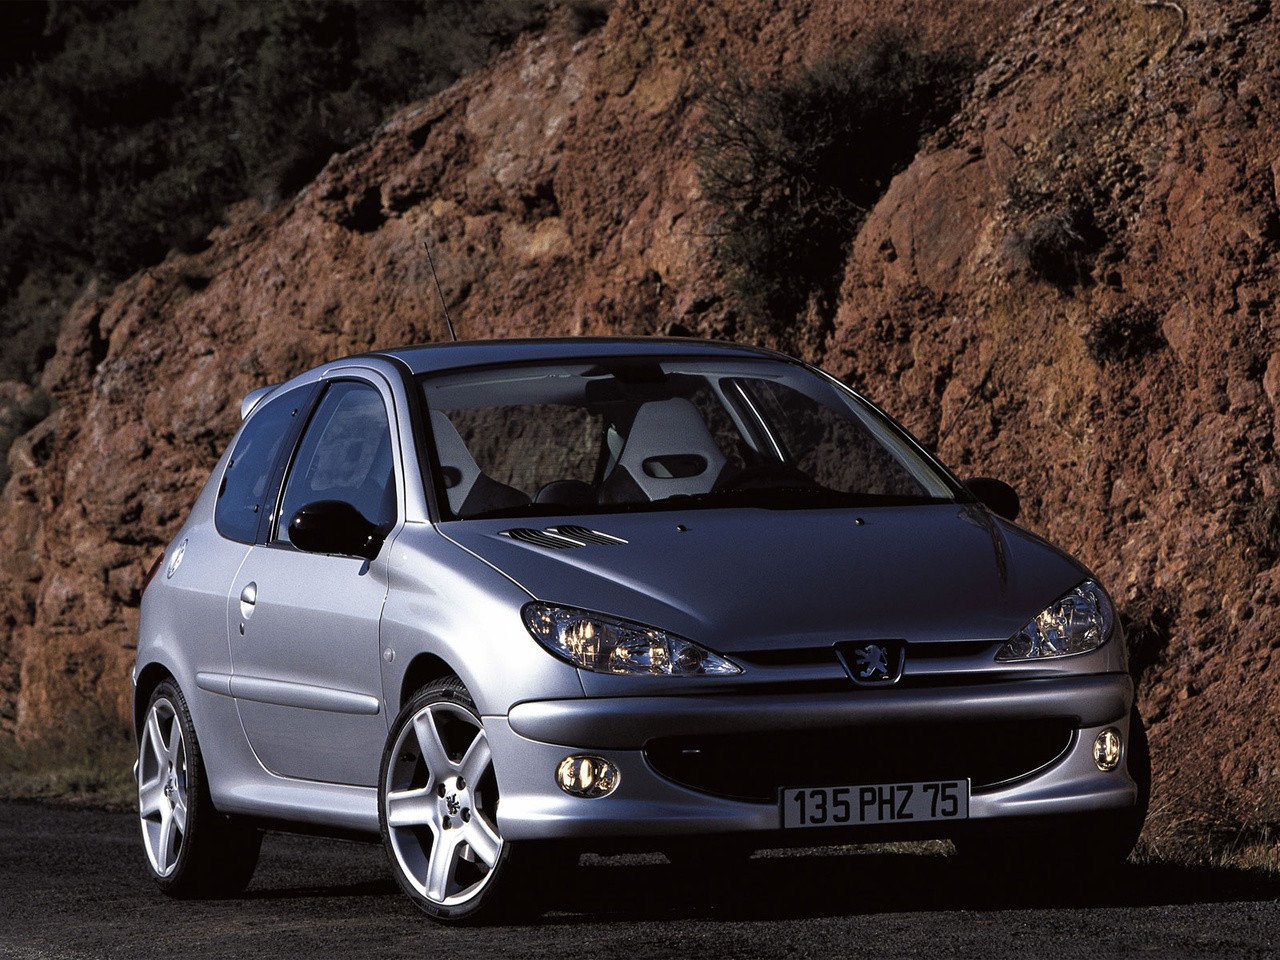 Peugeot 206 Tuning - Peugeot & Cars Background Wallpapers on